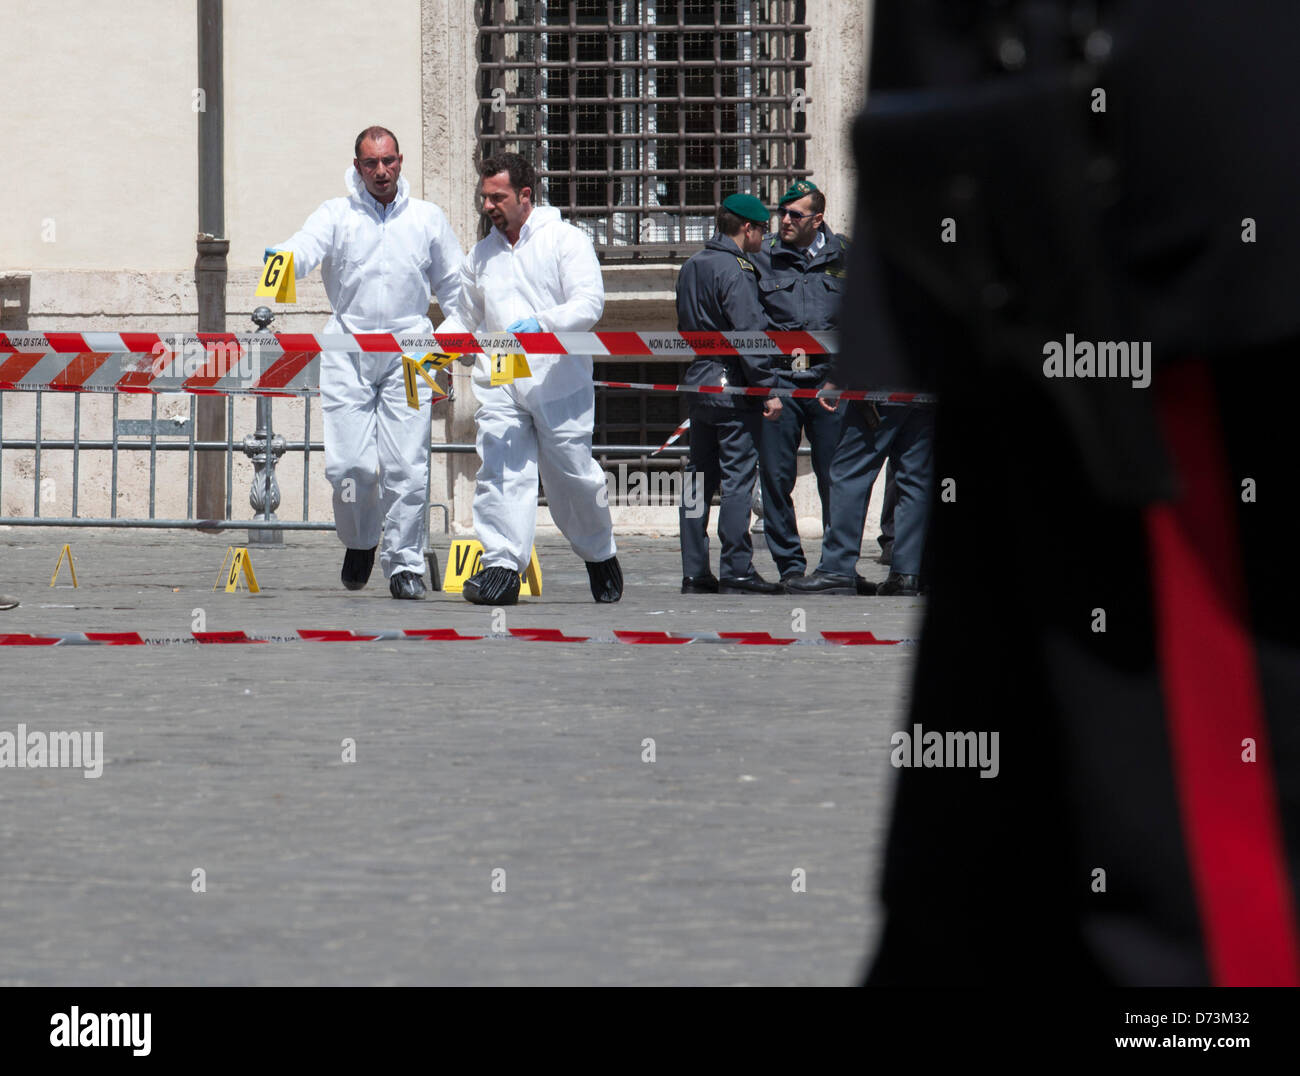 28th April 2013, Rome, Italy. During the swearing in of the new government of Prime Minister Enrico Letta, policemen have been injured in a shooting at Palazzo Chigi. Alamy Live News. Stock Photo